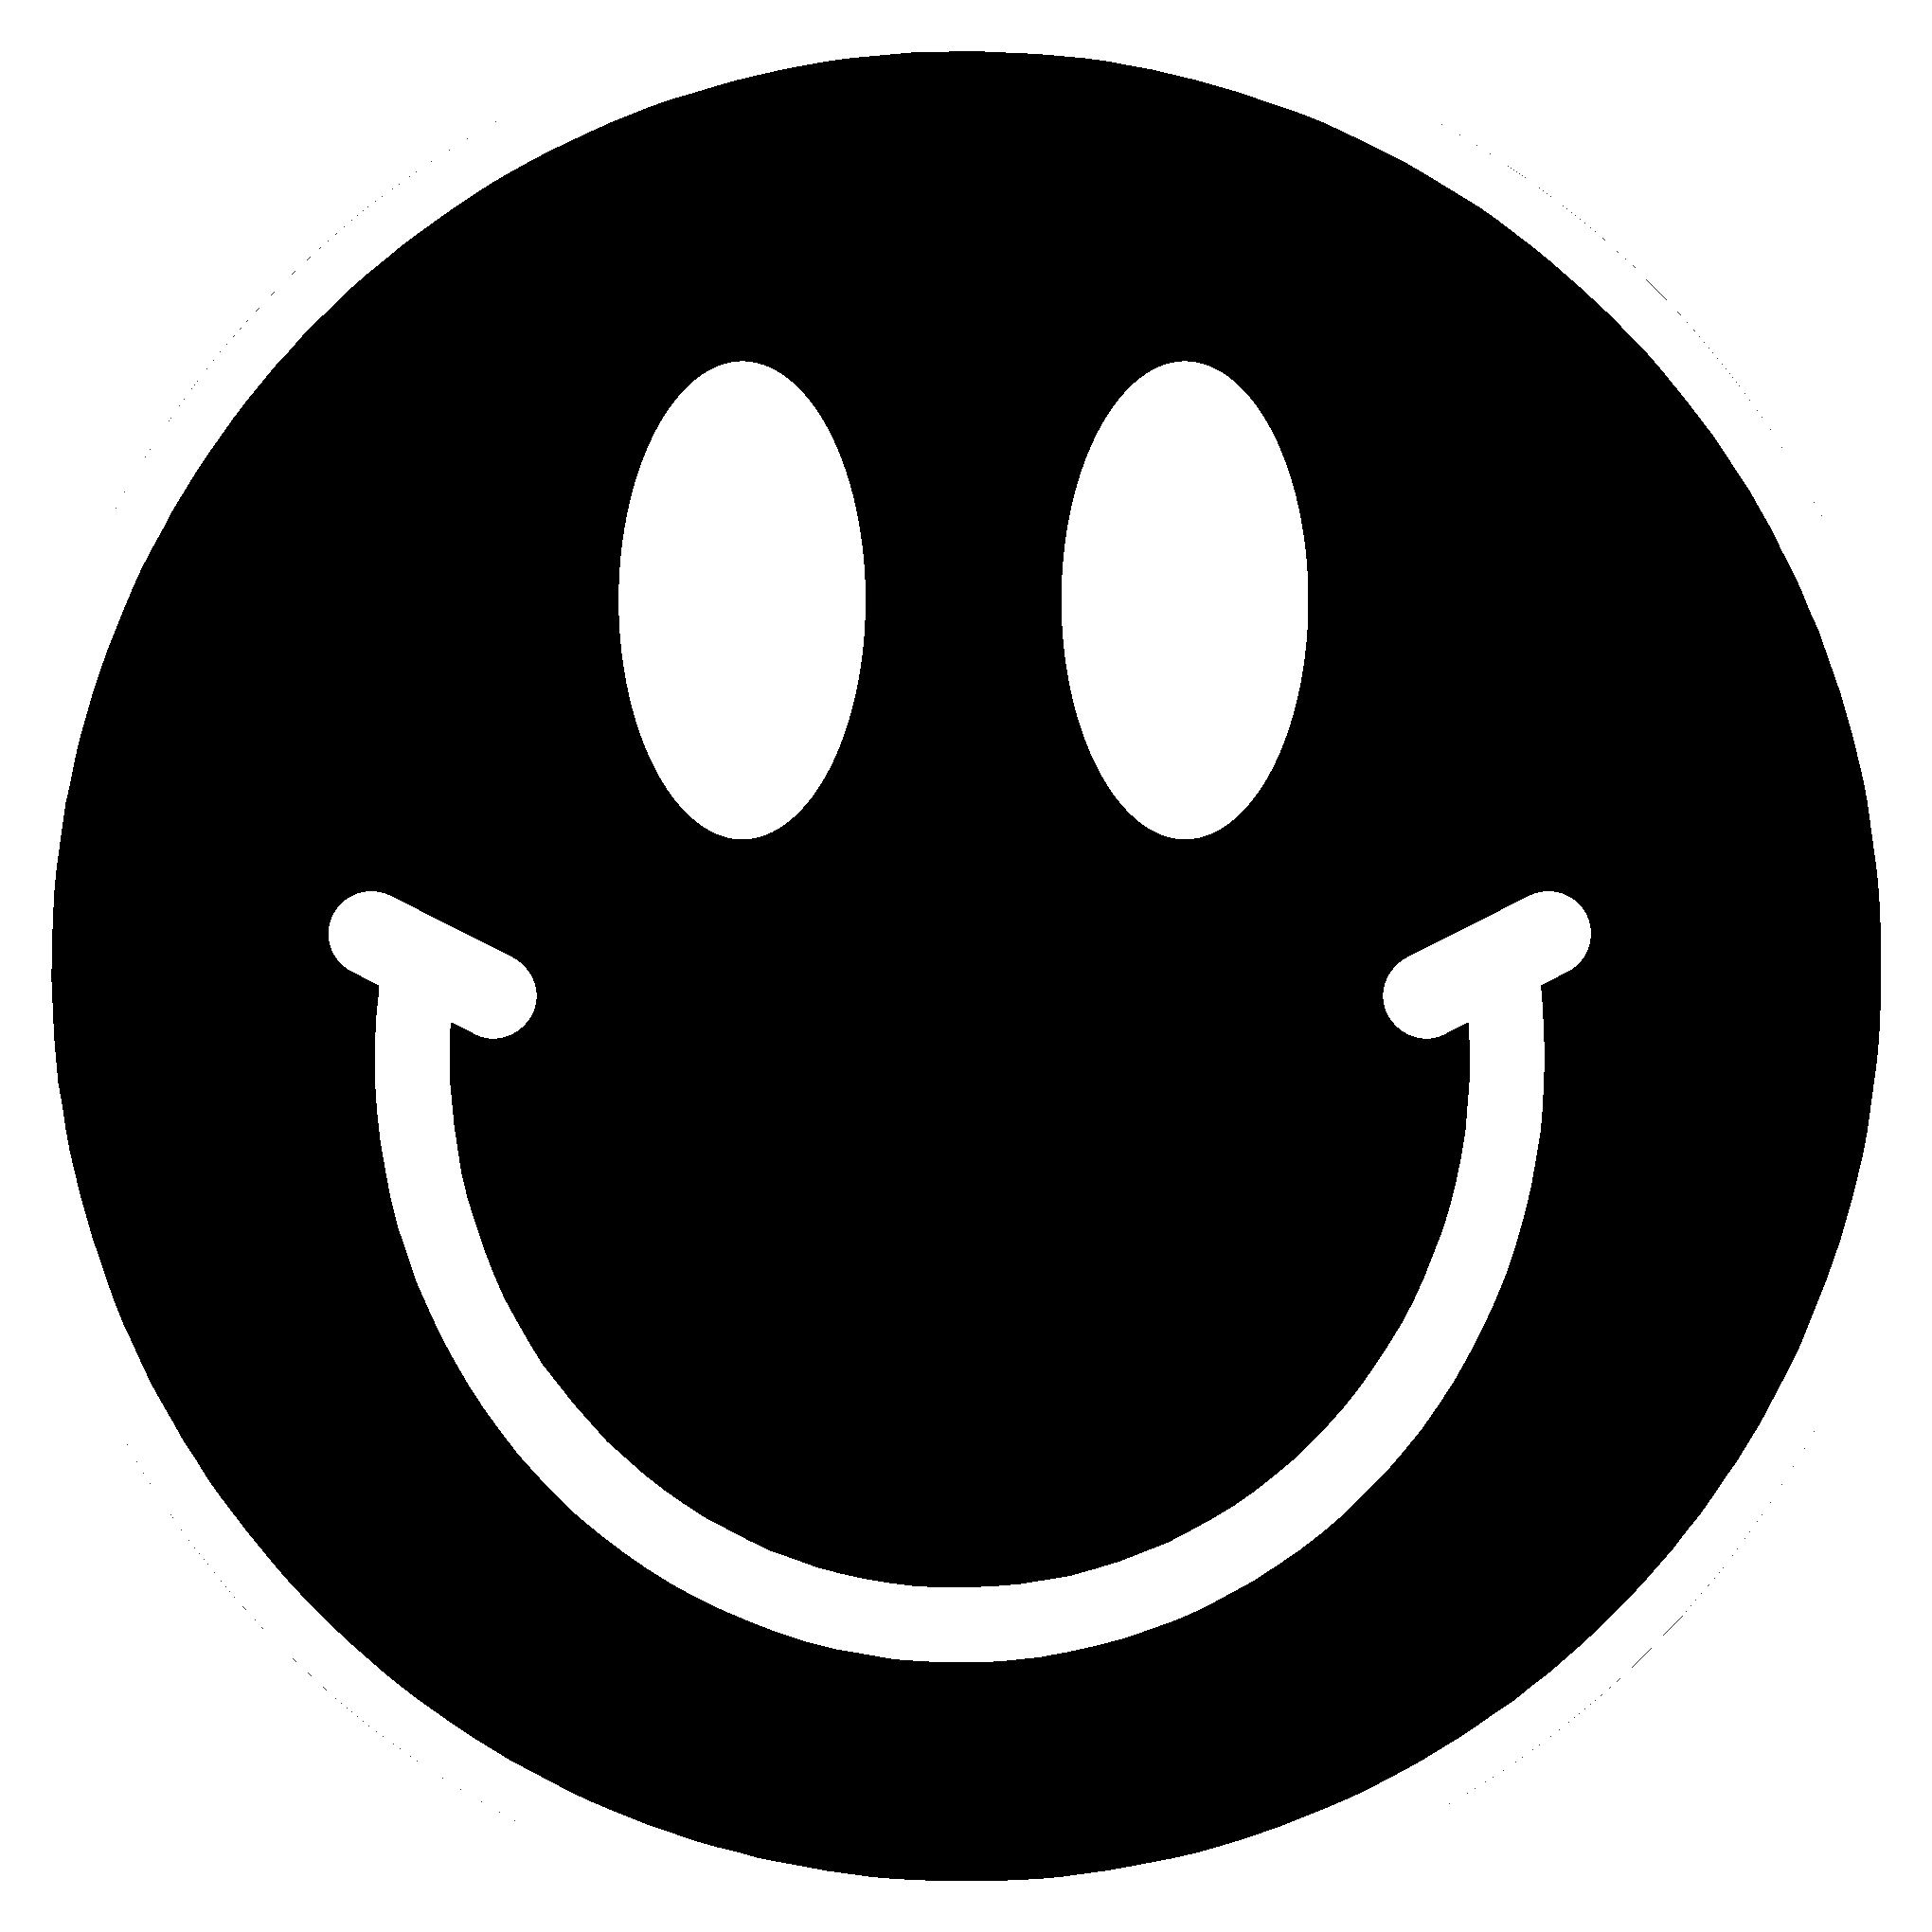 Smiley Face Background PNG